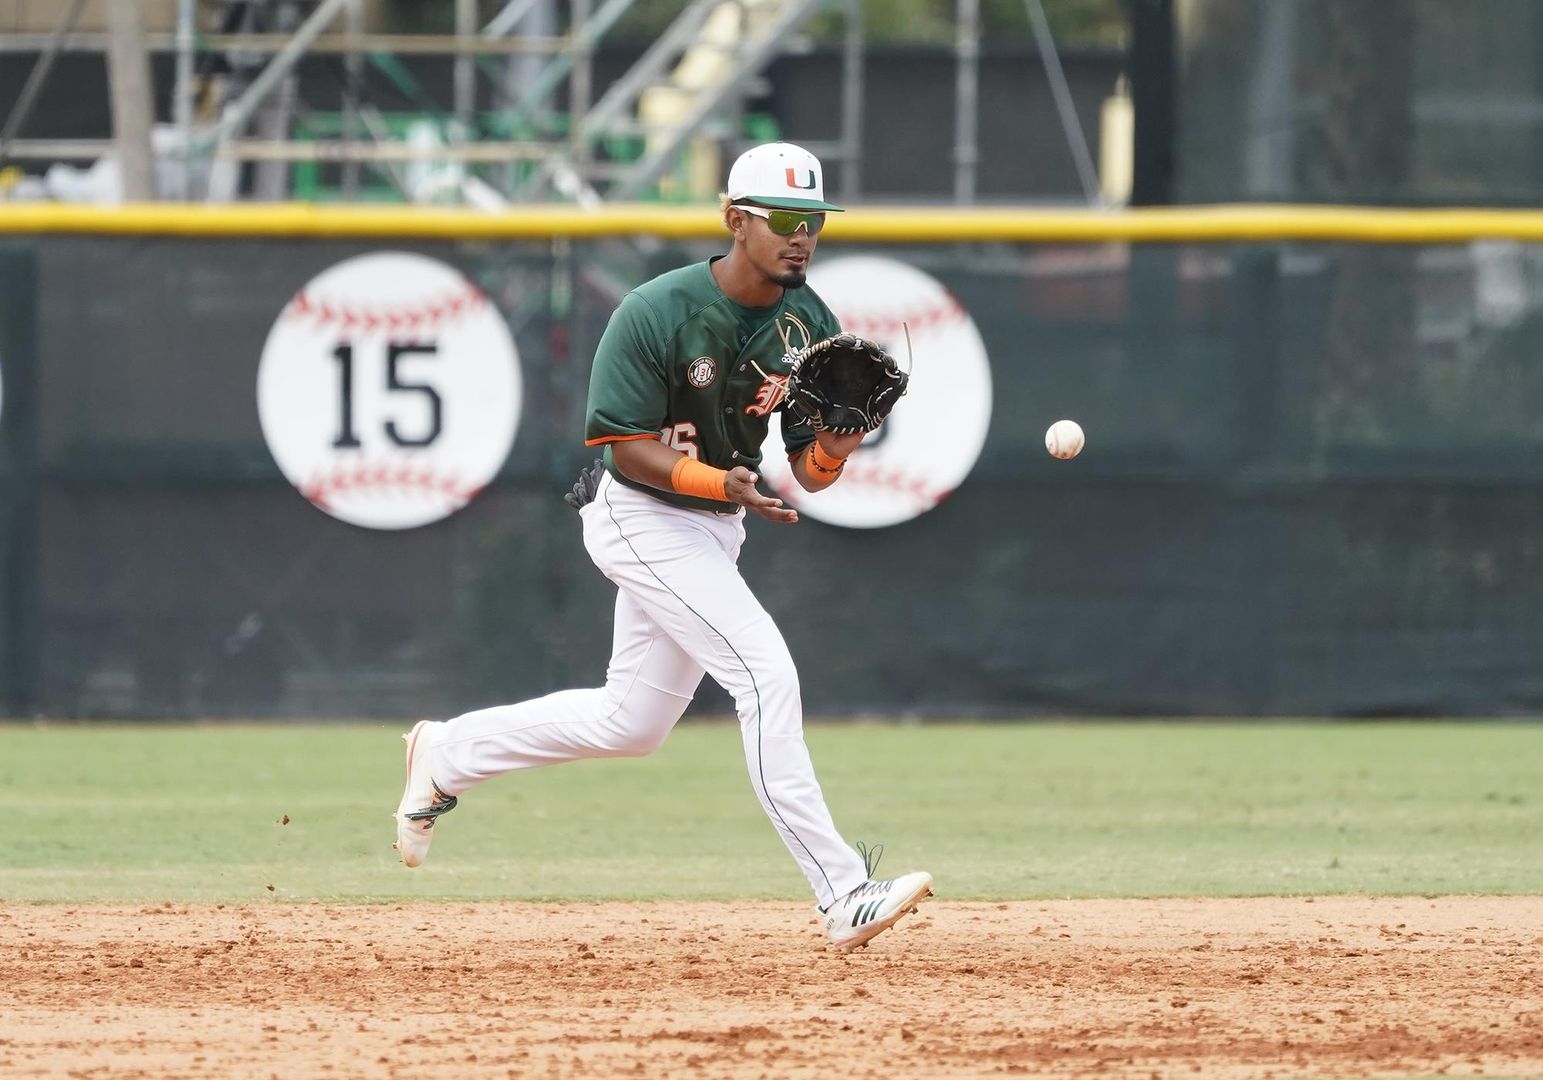 Canes Fall to Owls, 7-4